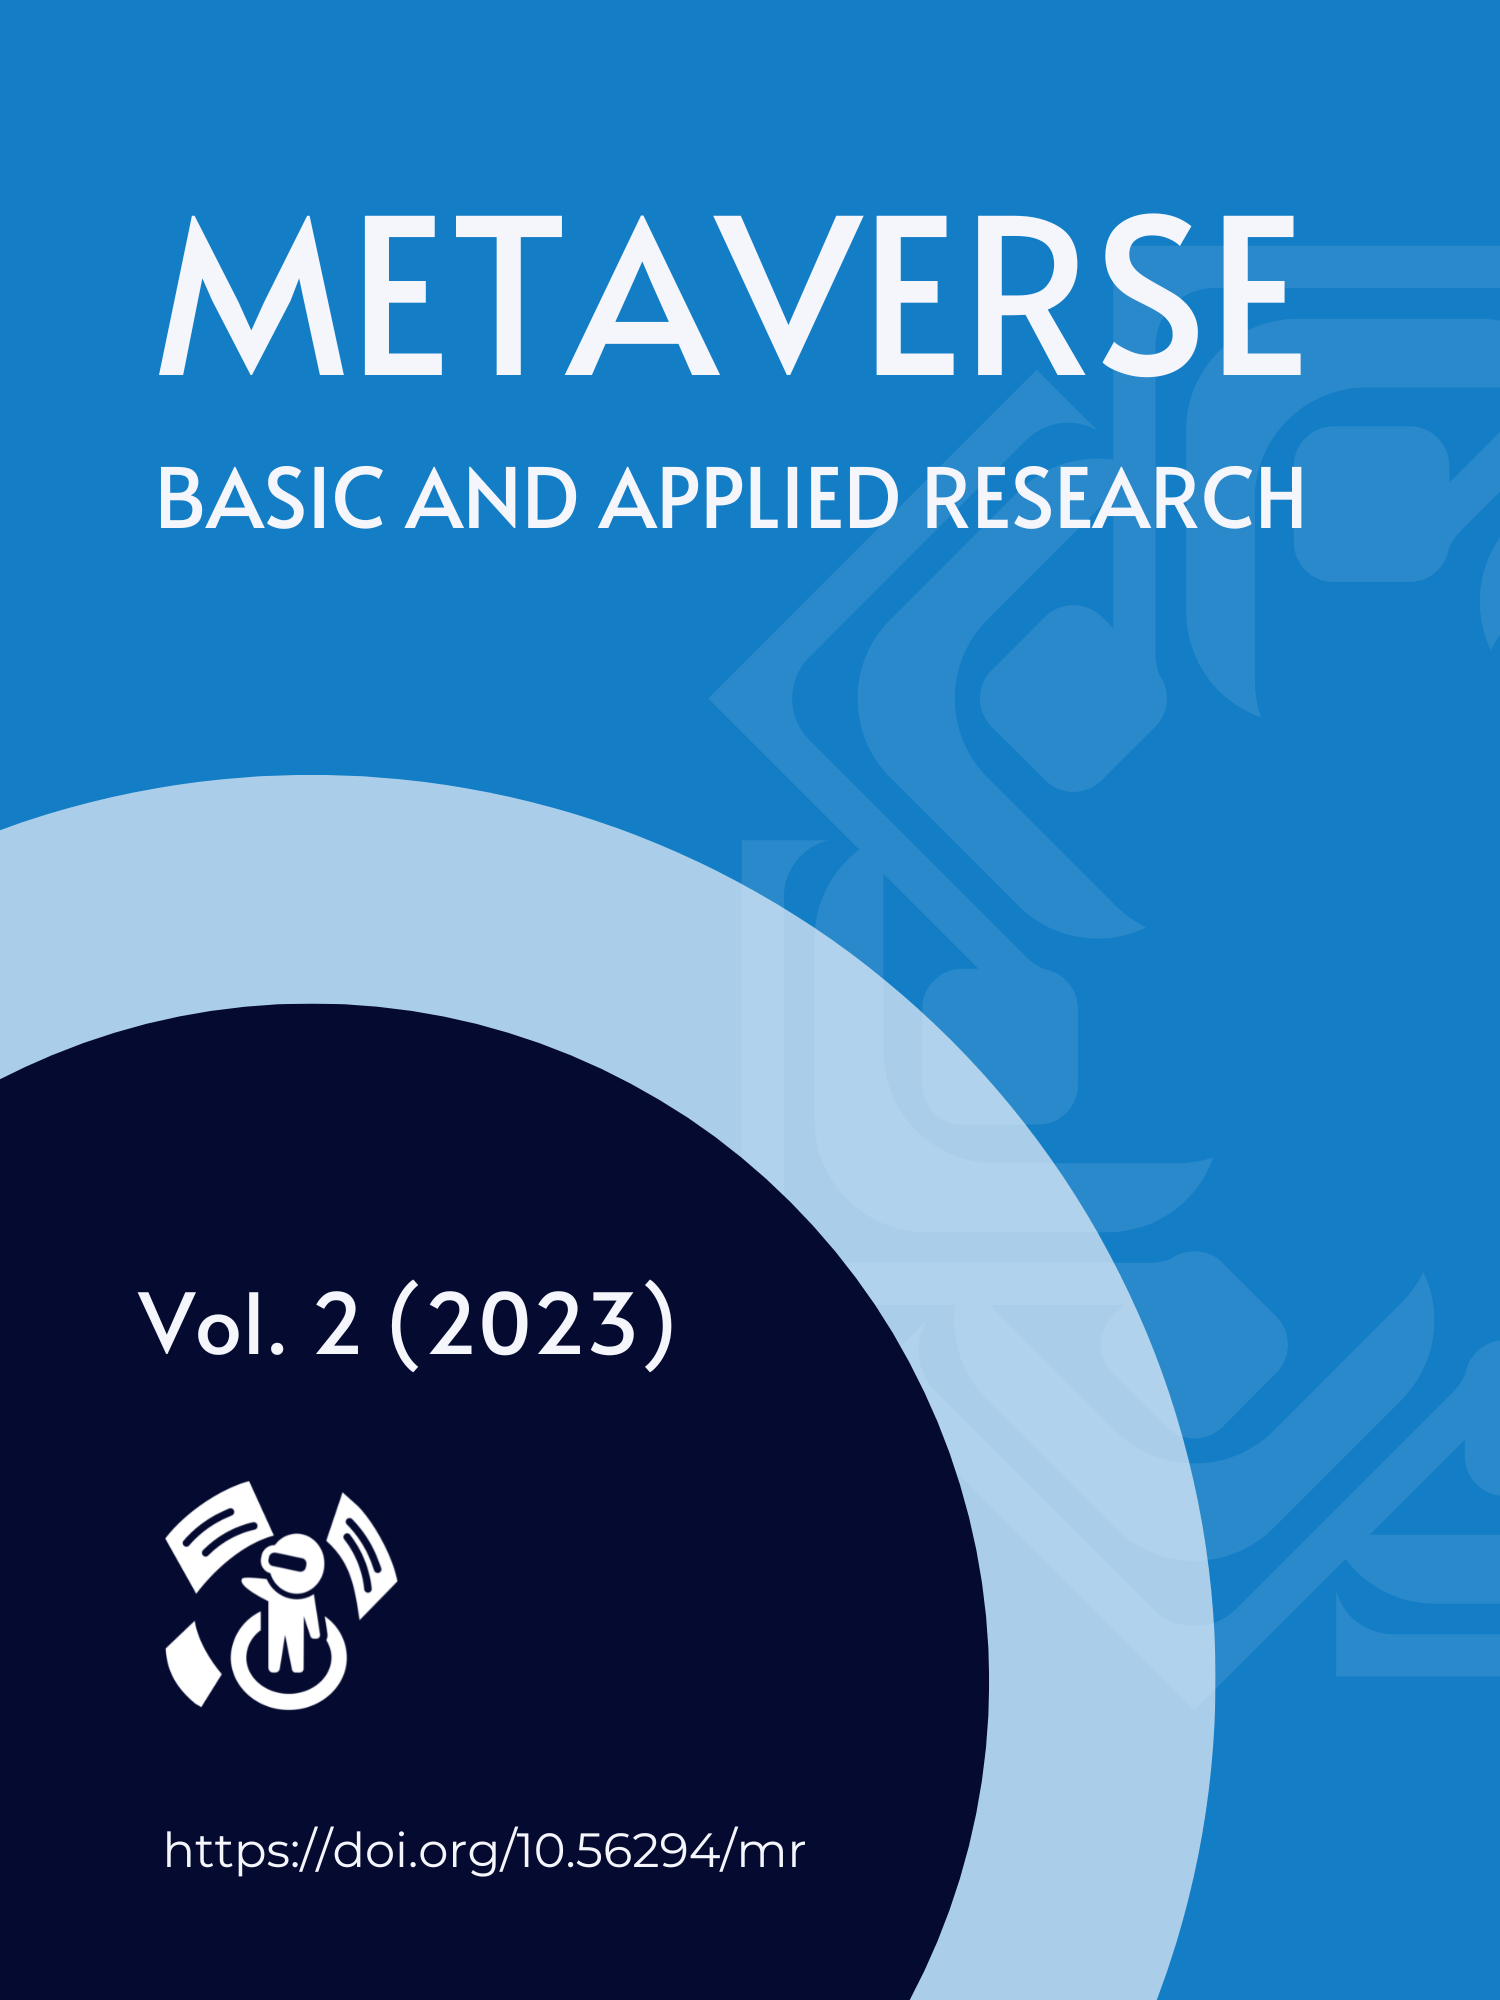 					View Vol. 2 (2023): Metaverse Basic and Applied Research
				